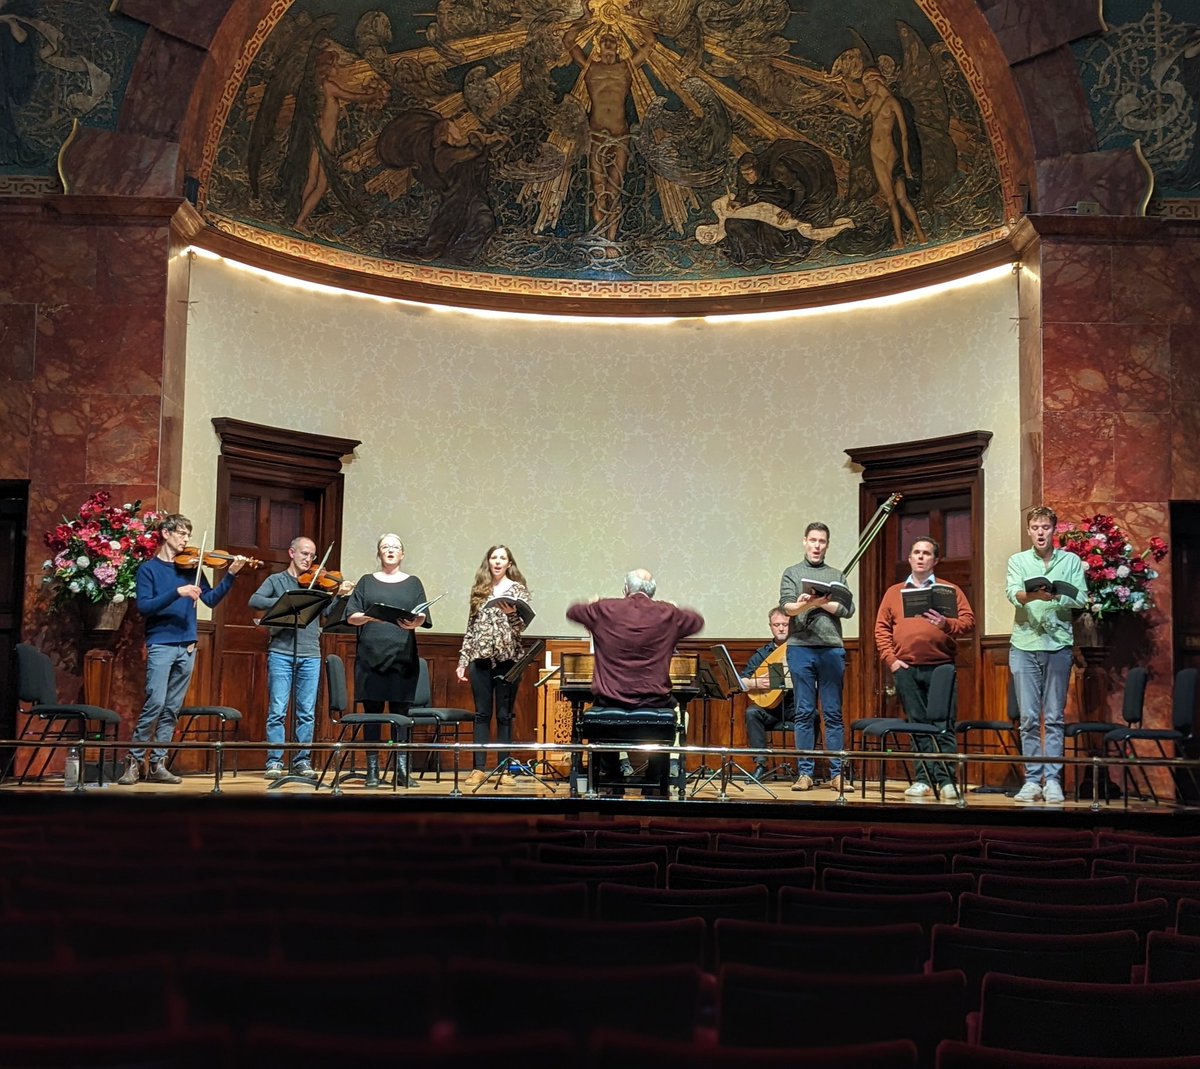 A treat for @DunedinConsort to be @wigmore_hall for Monteverdi, East & Buxtehude's Membra Jesu Nostri tonight with the luminous @phantasmviol.

There's still time to come and join us for some gorgeously swirling and reflective music.